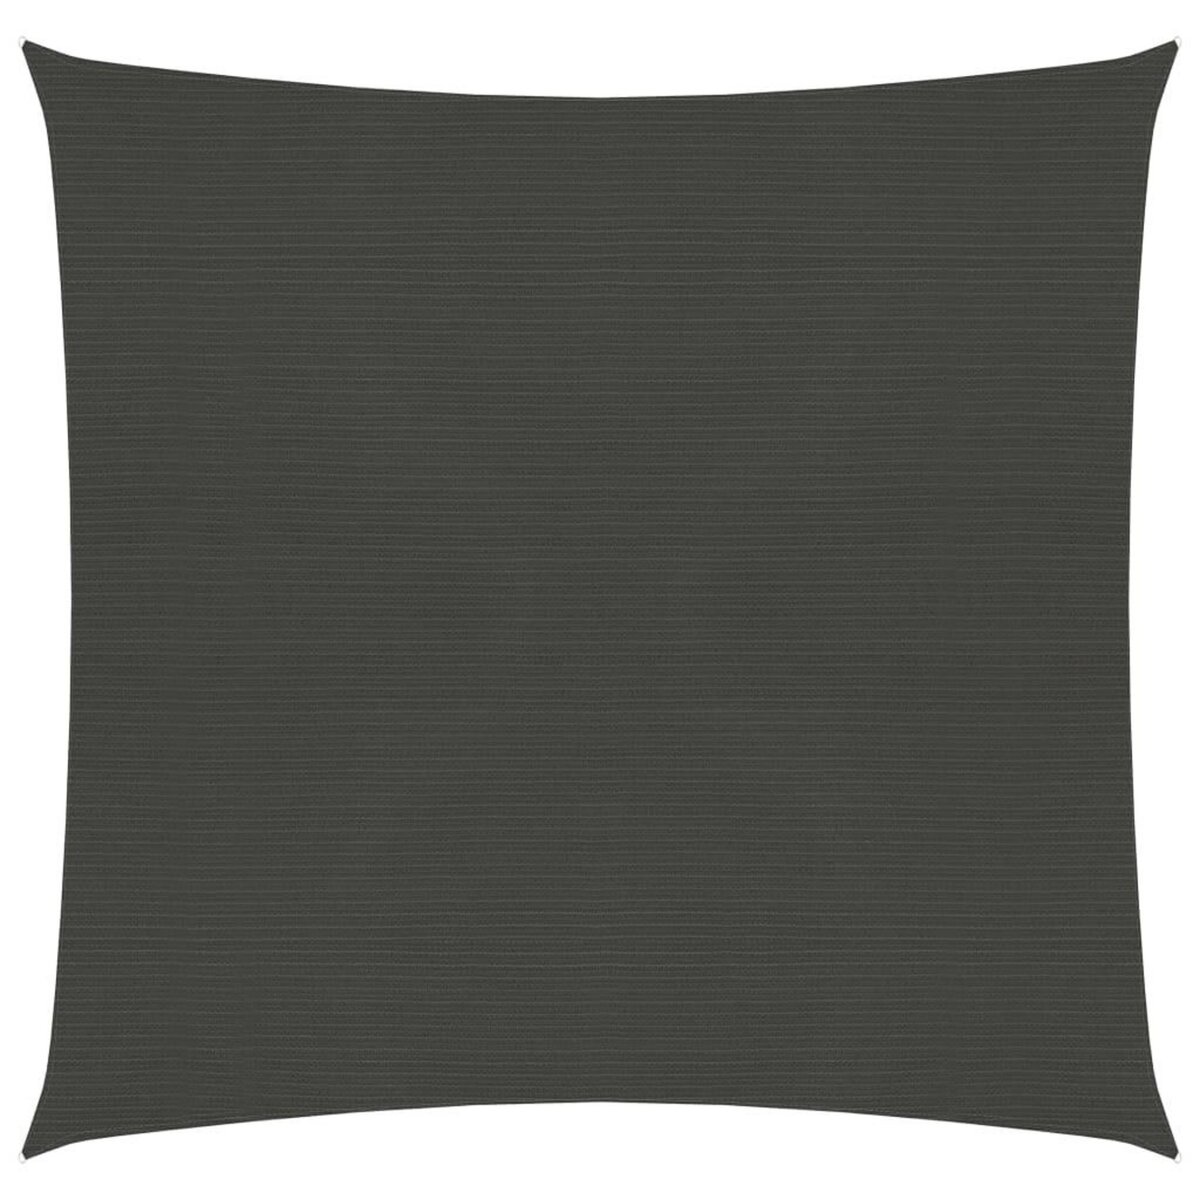 VIDAXL Voile d'ombrage 160 g/m^2 Anthracite 4,5x4,5 m PEHD